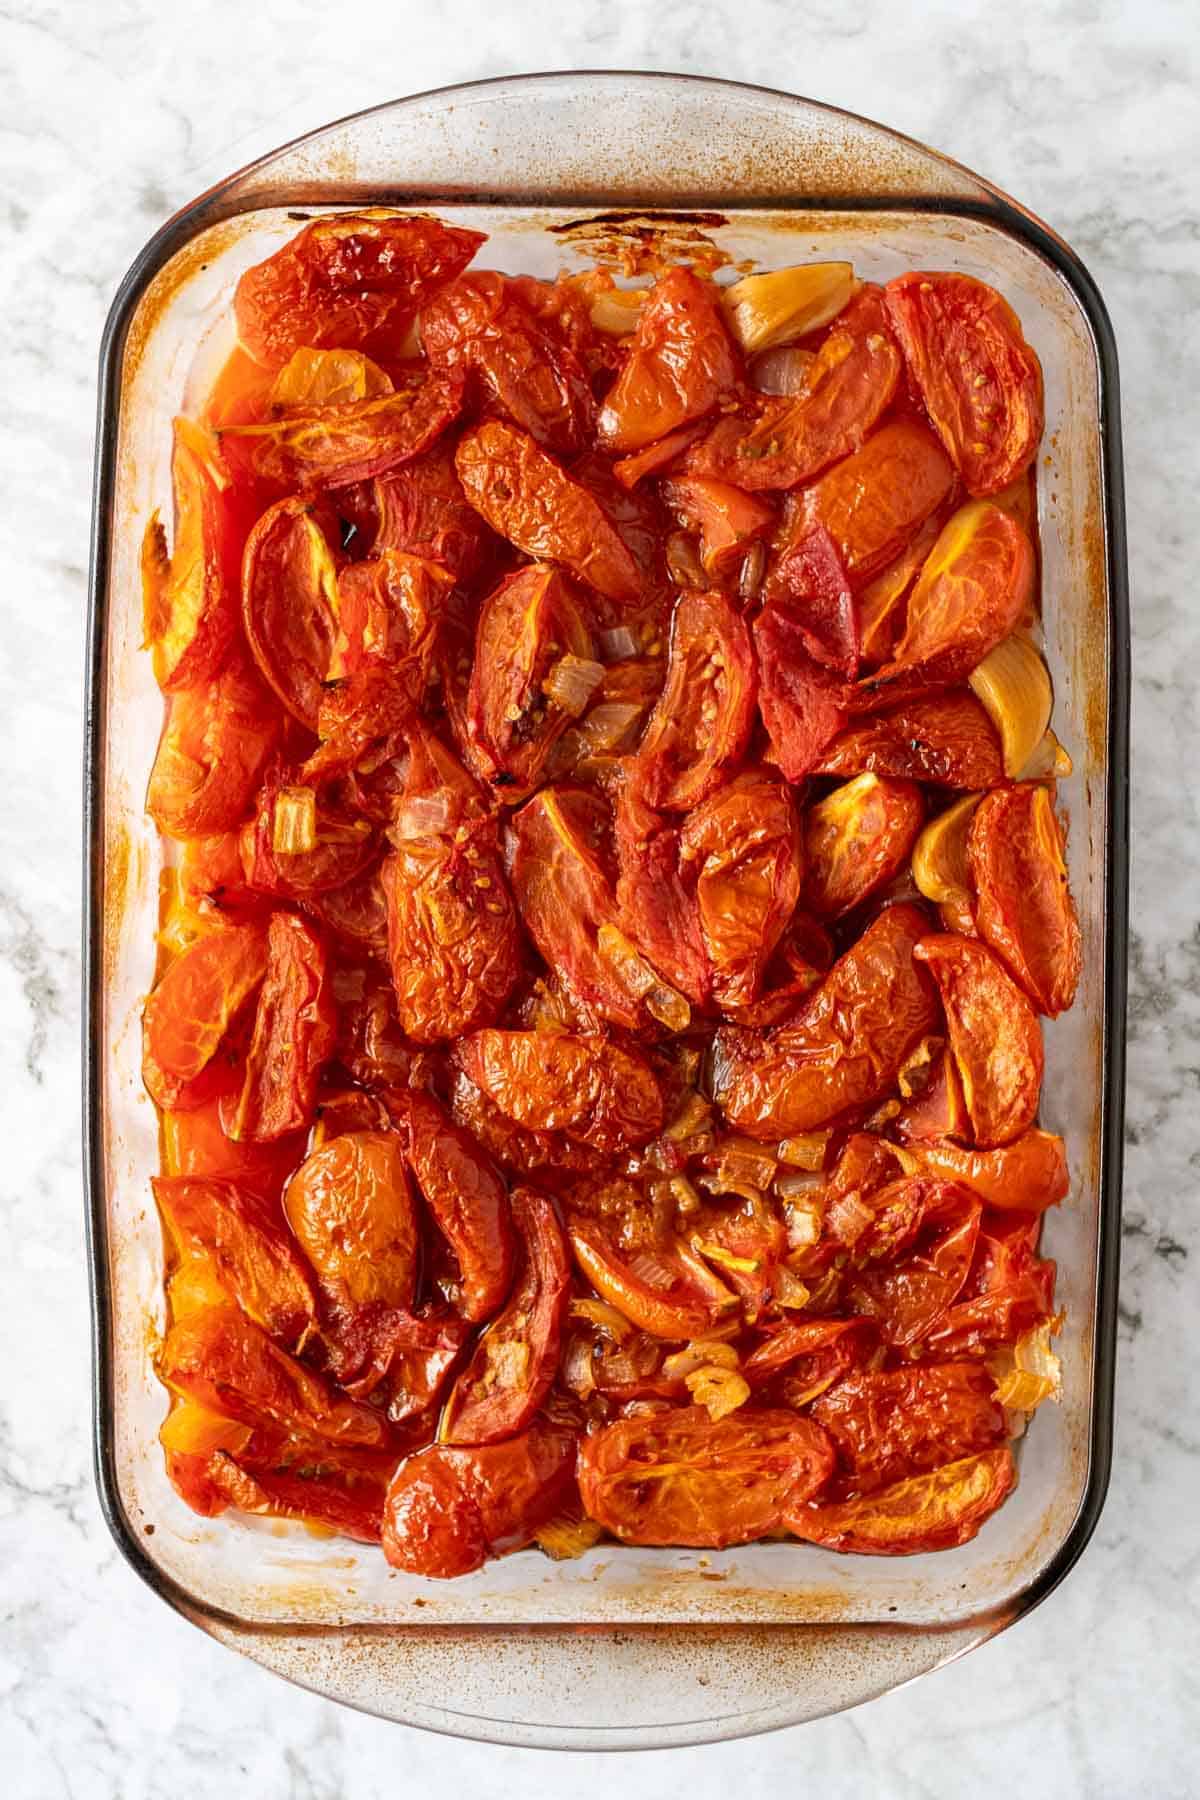 Roasted tomatoes in a glass baking pan